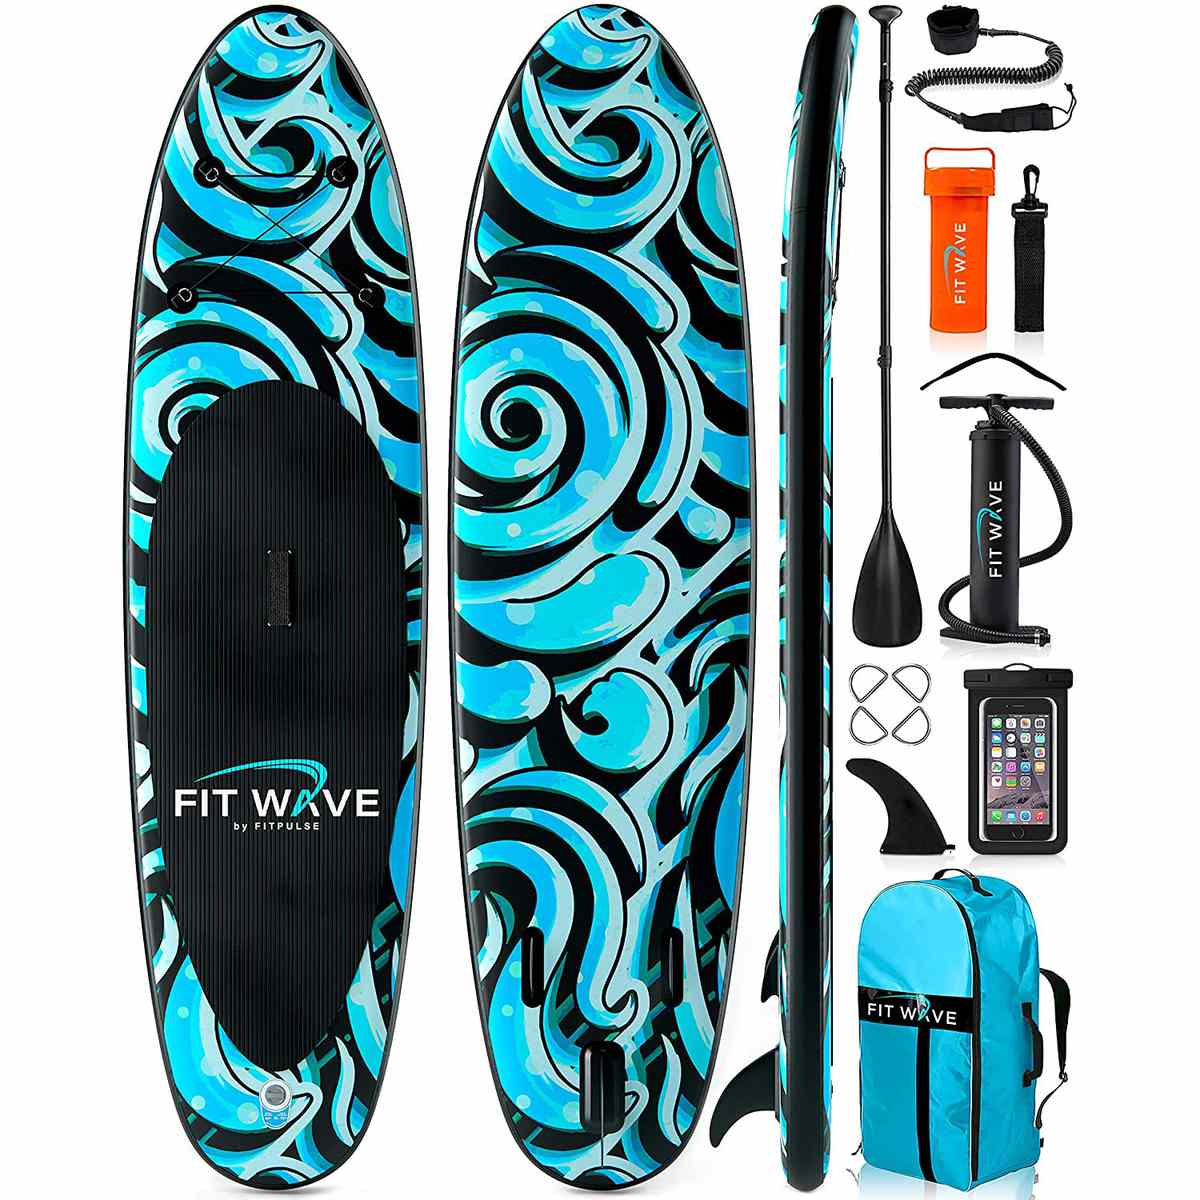 Fit Wave paddle board